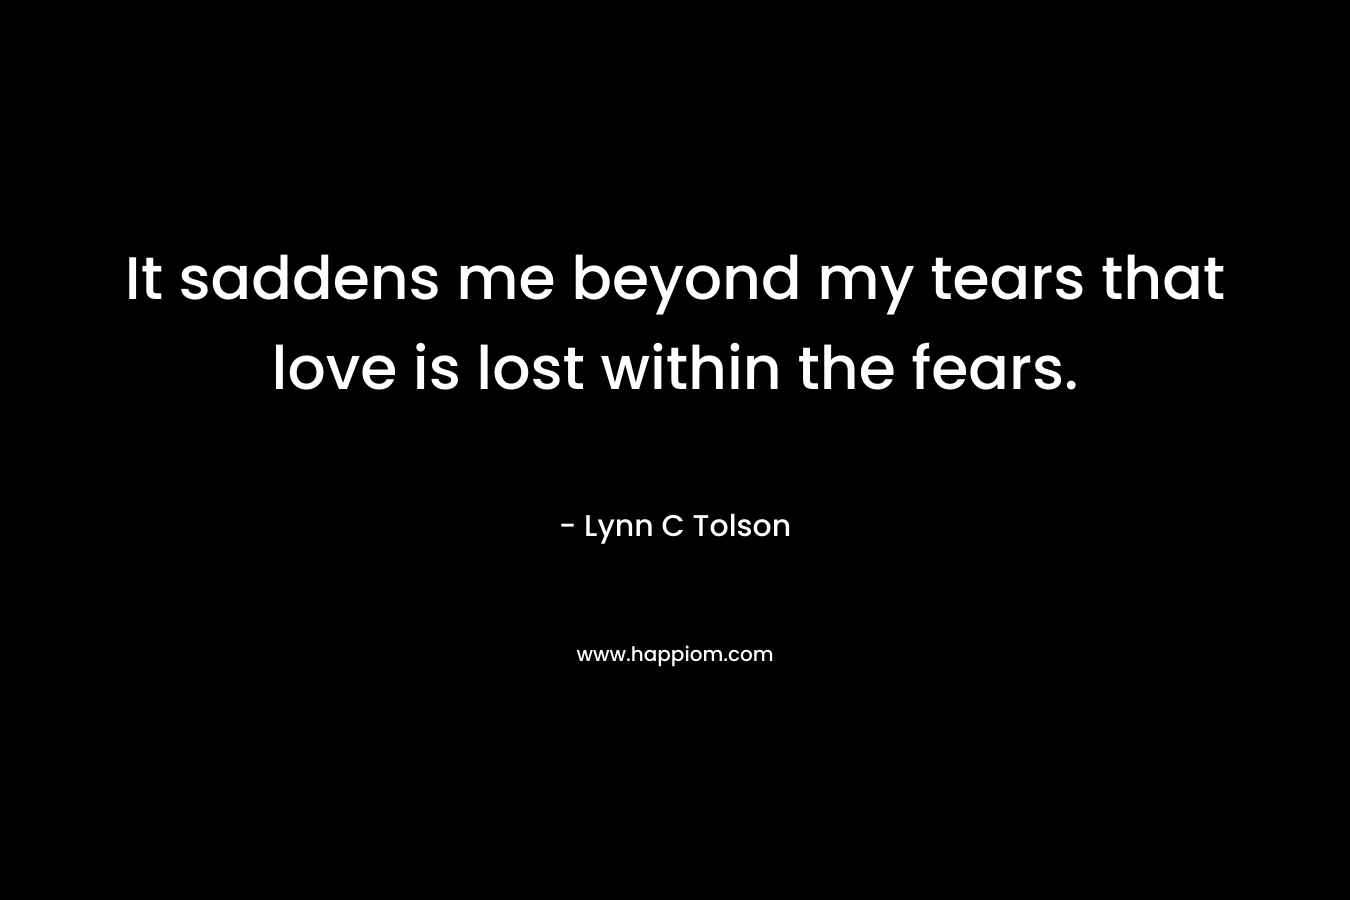 It saddens me beyond my tears that love is lost within the fears. – Lynn C Tolson